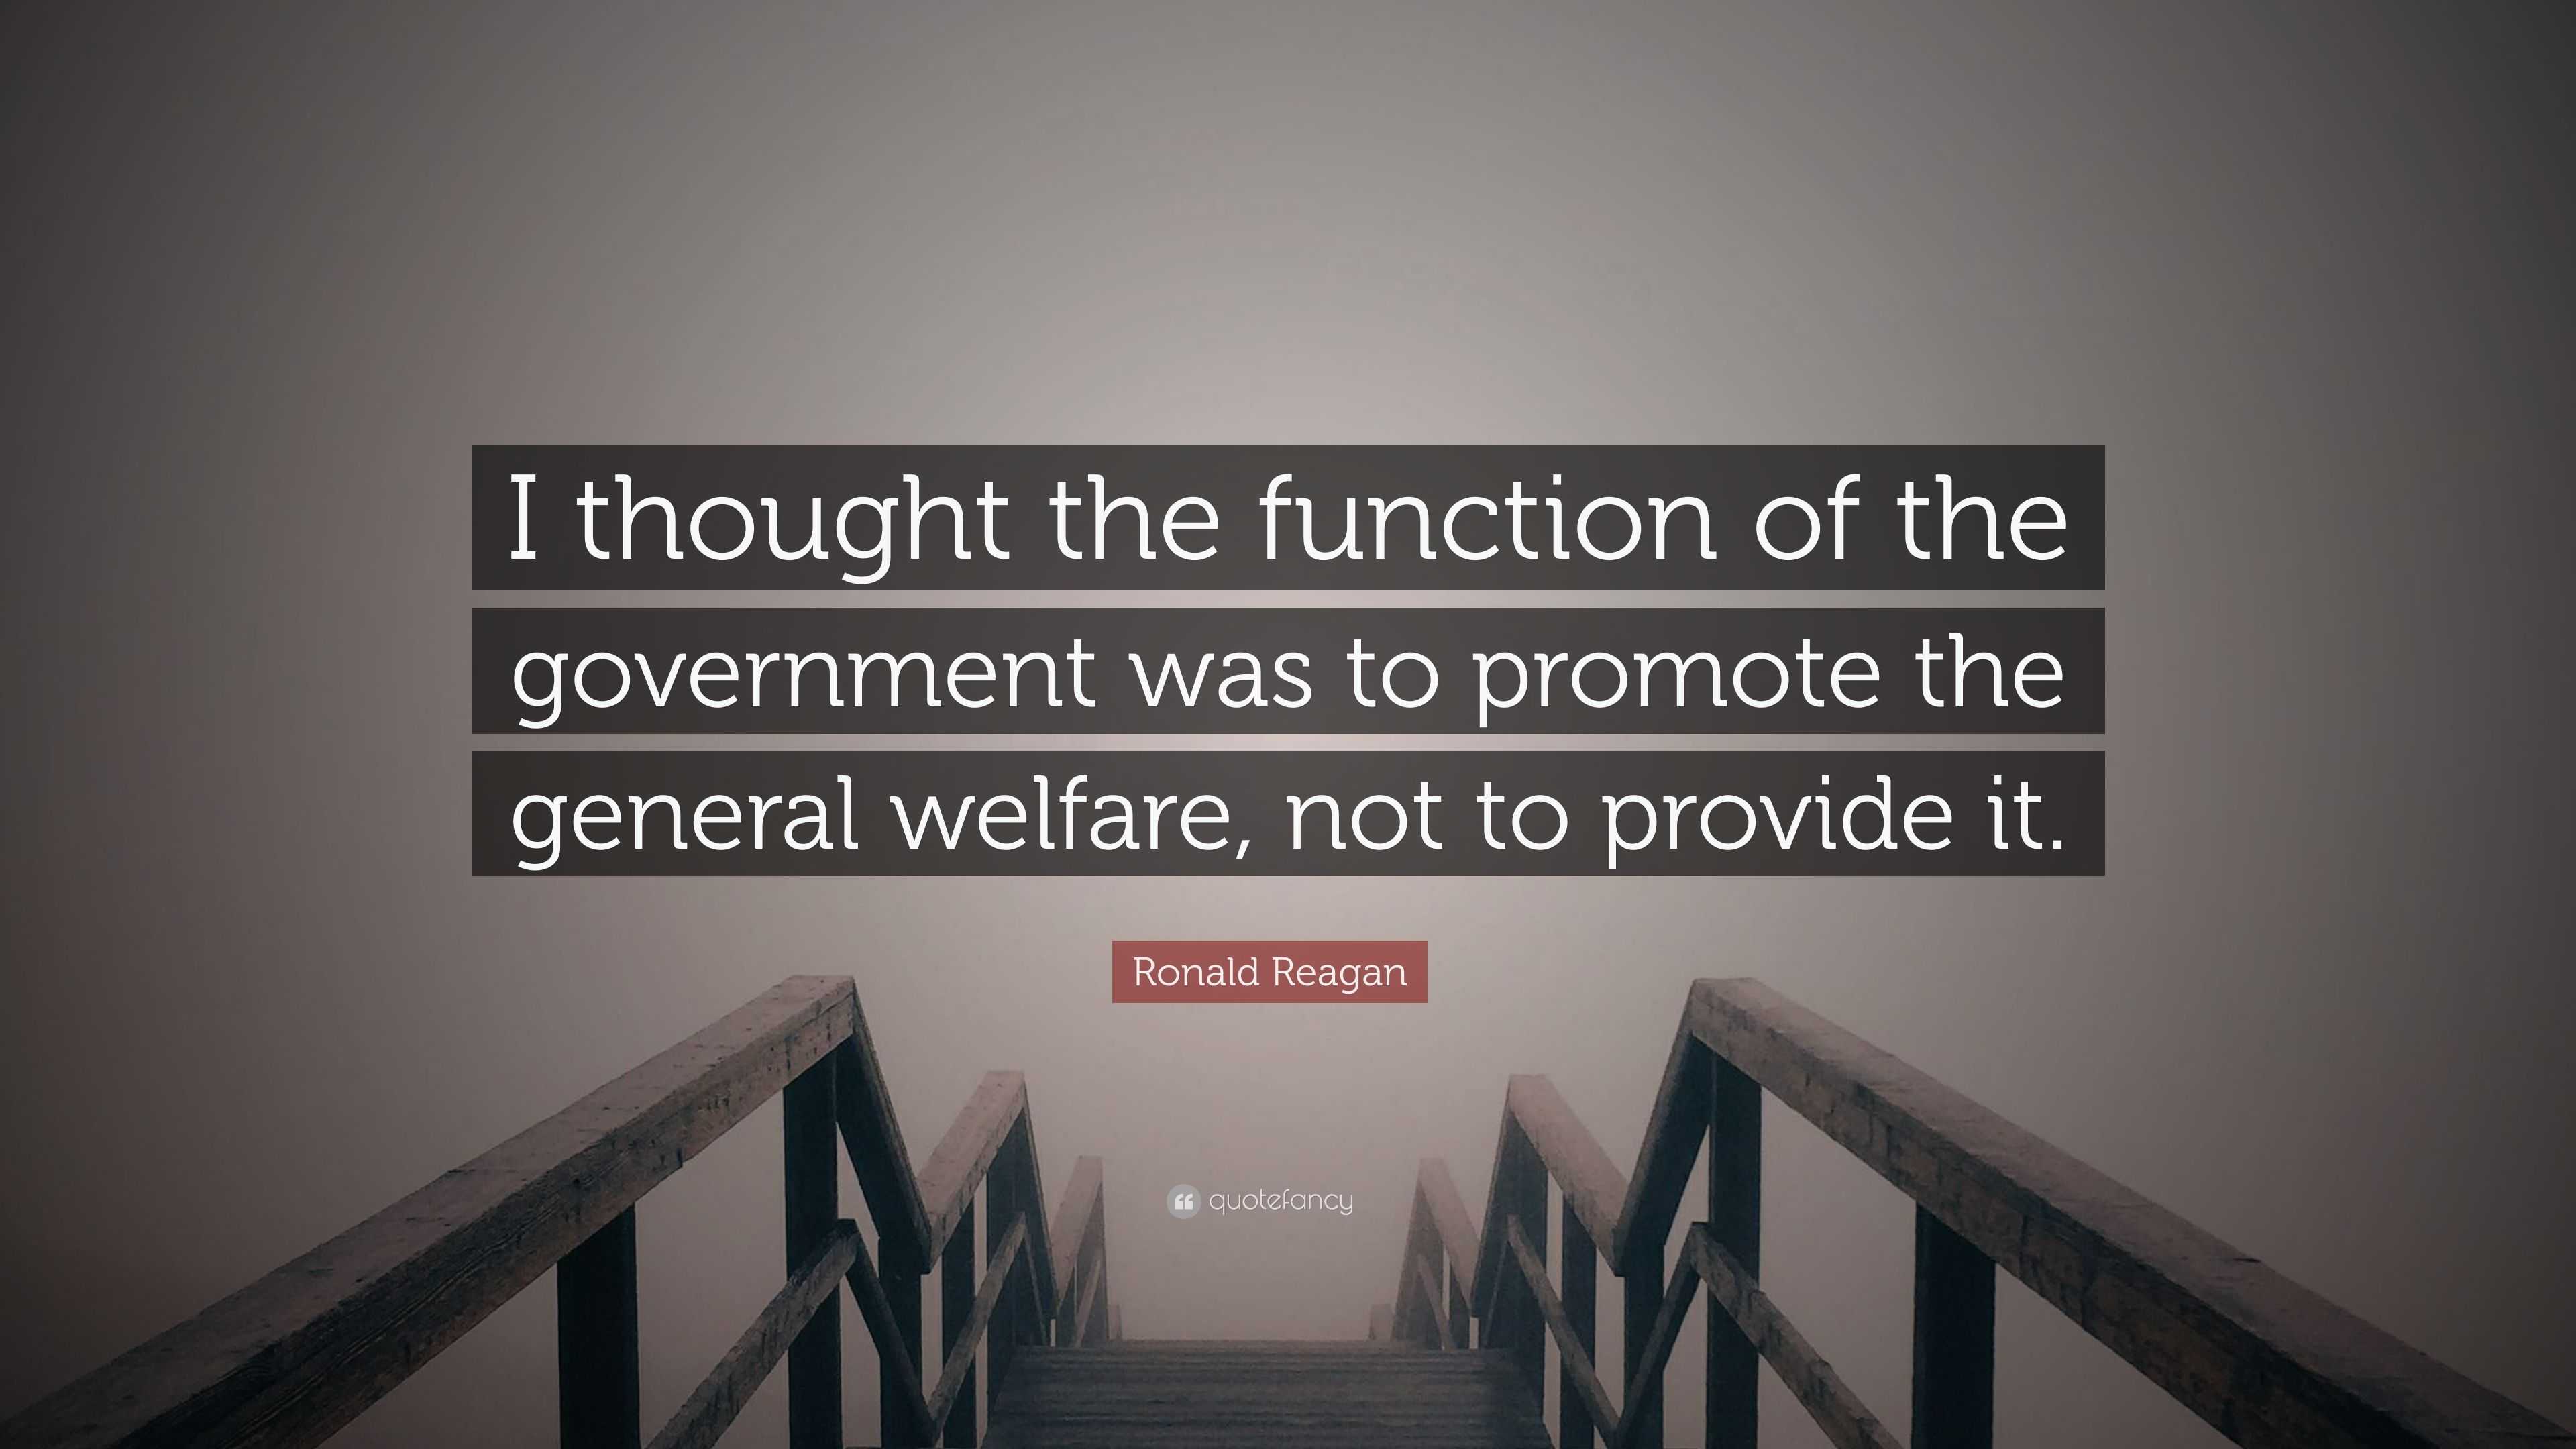 provide for the general welfare